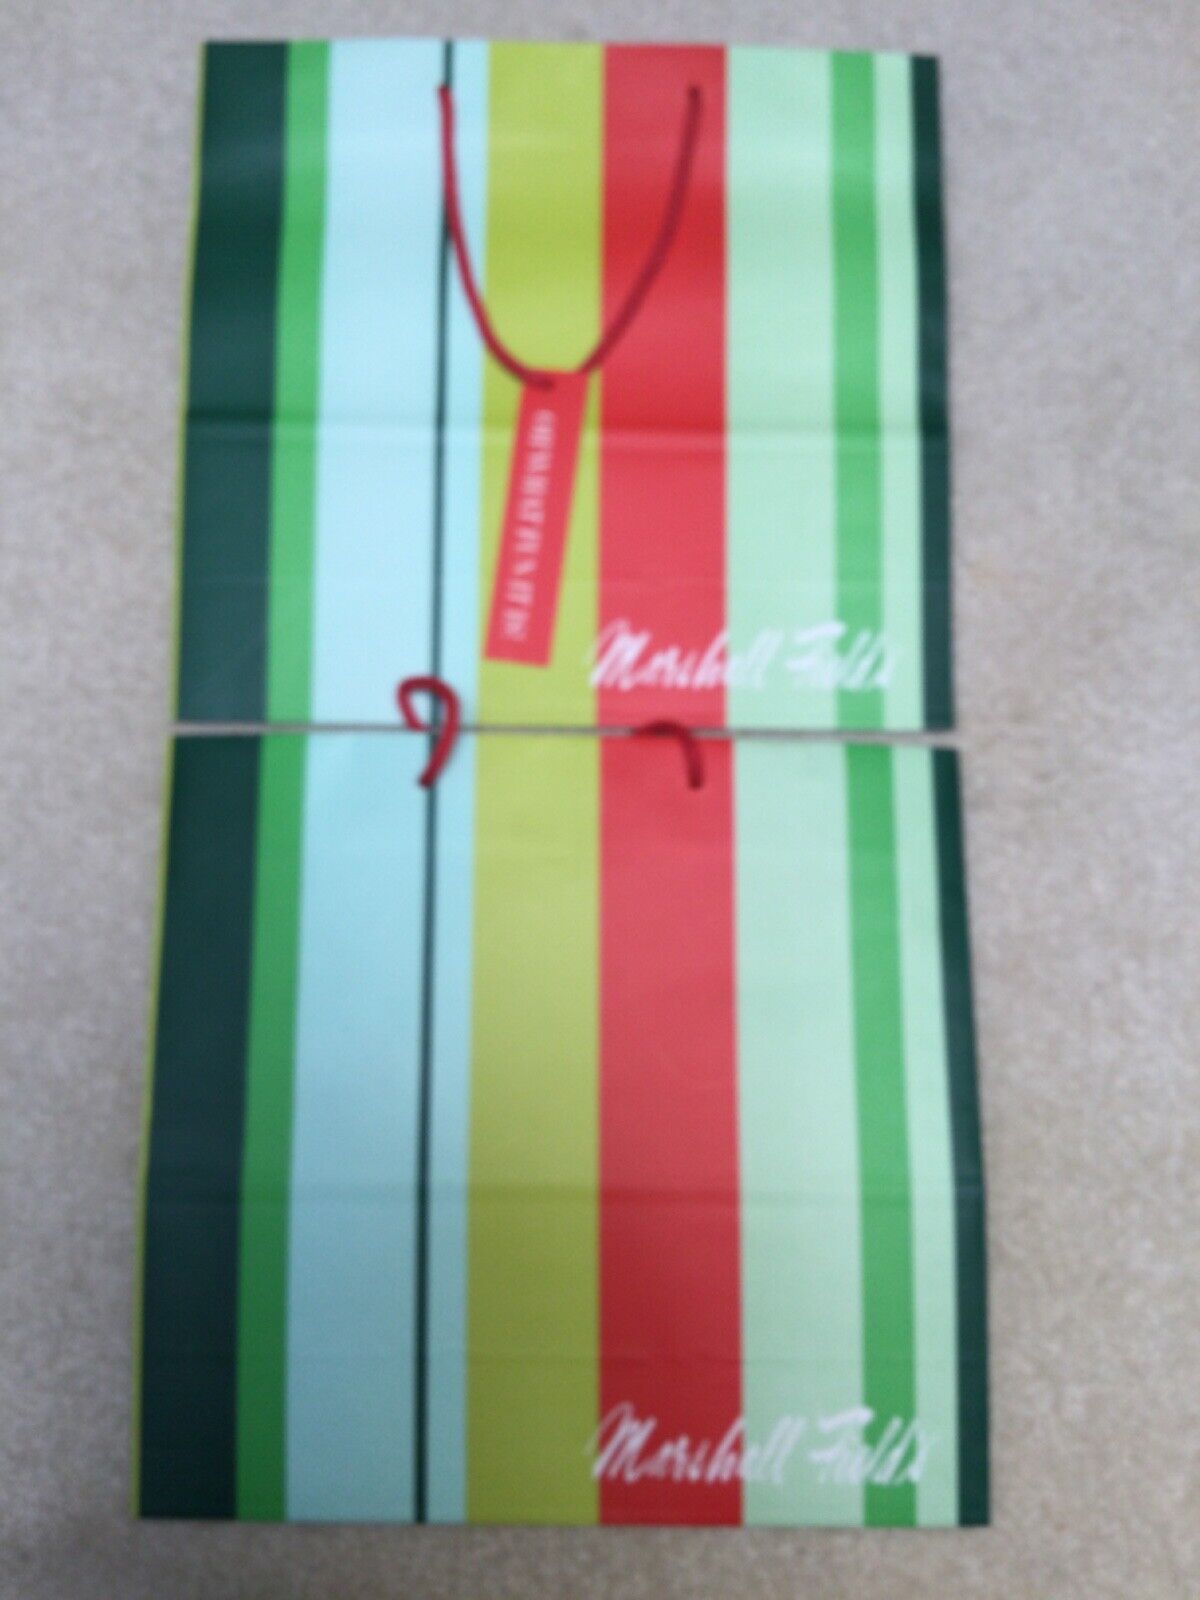 2 Green/Red Striped Marshall Field's Paper Bags 10.75” H. x 11.5” L x 4” W. each